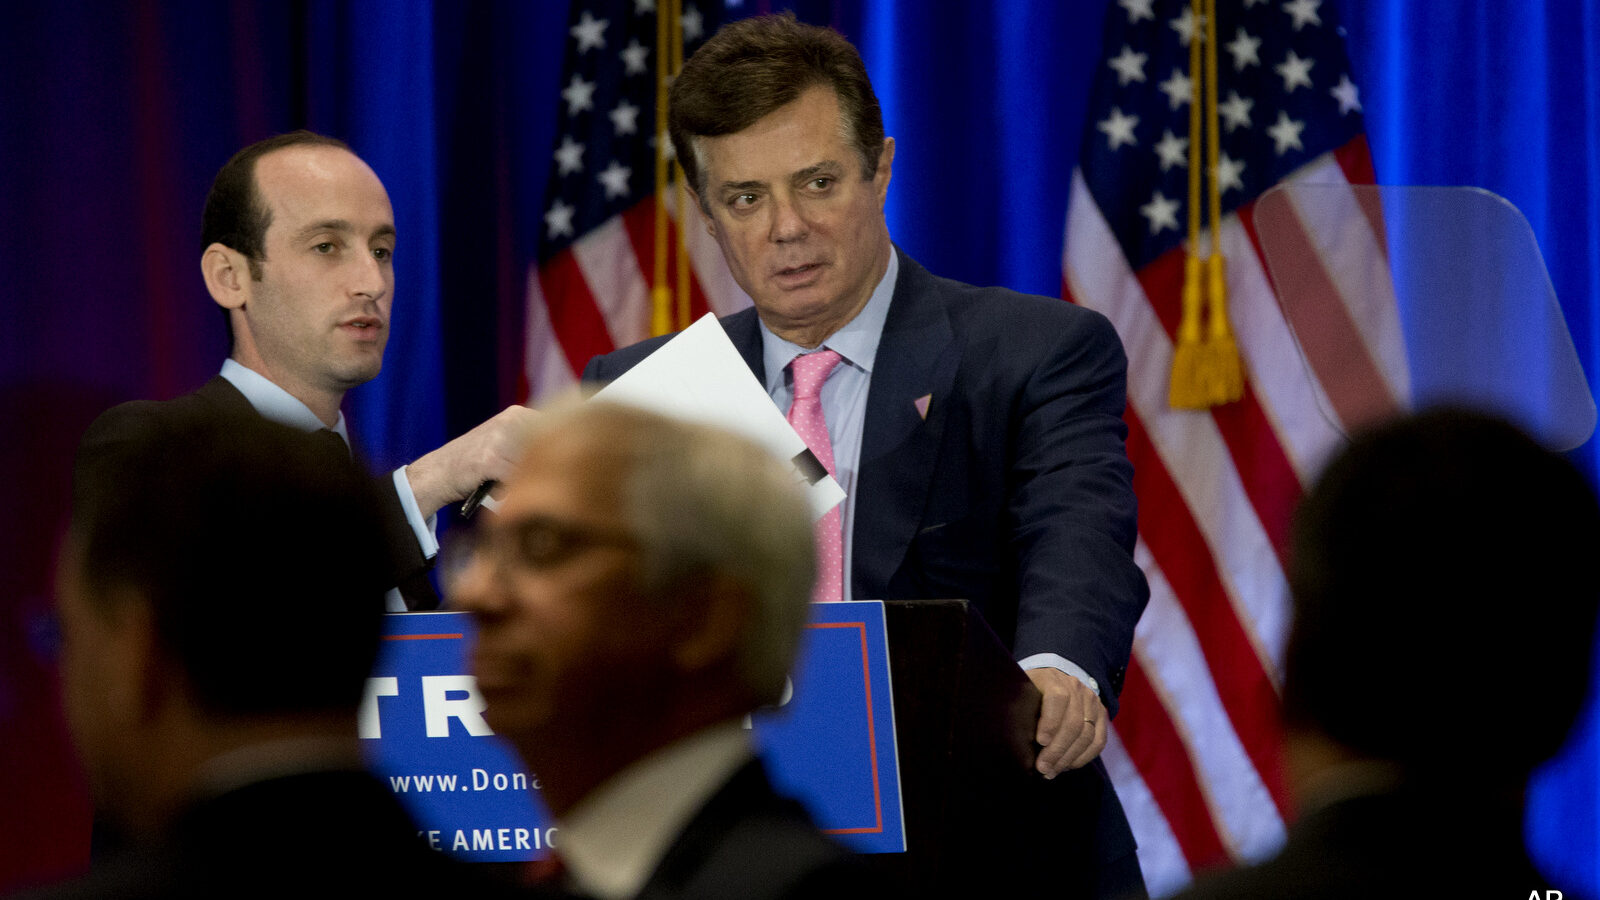 Paul Manafort, right, and Stephen Miller, senior policy adviser for Republican presidential candidate Donald Trump appear on stage ahead of Trump's speech, Wednesday, June 22, 2016, in New York.